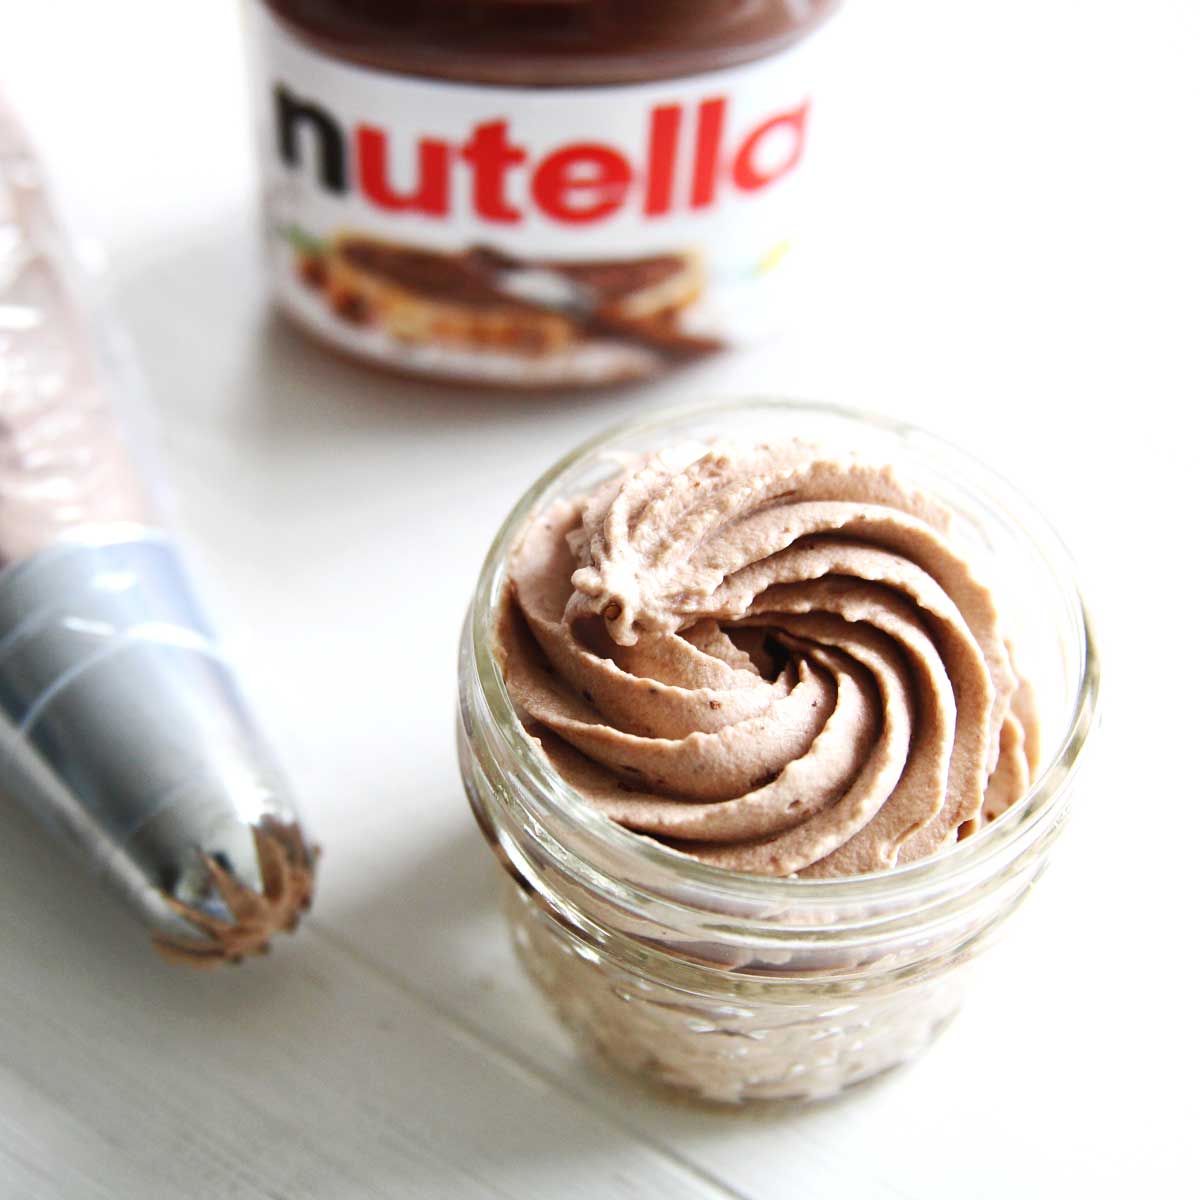 How to Make Nutella Chocolate Whipped Cream (Chantilly Cream) - Peppermint Whipped Cream